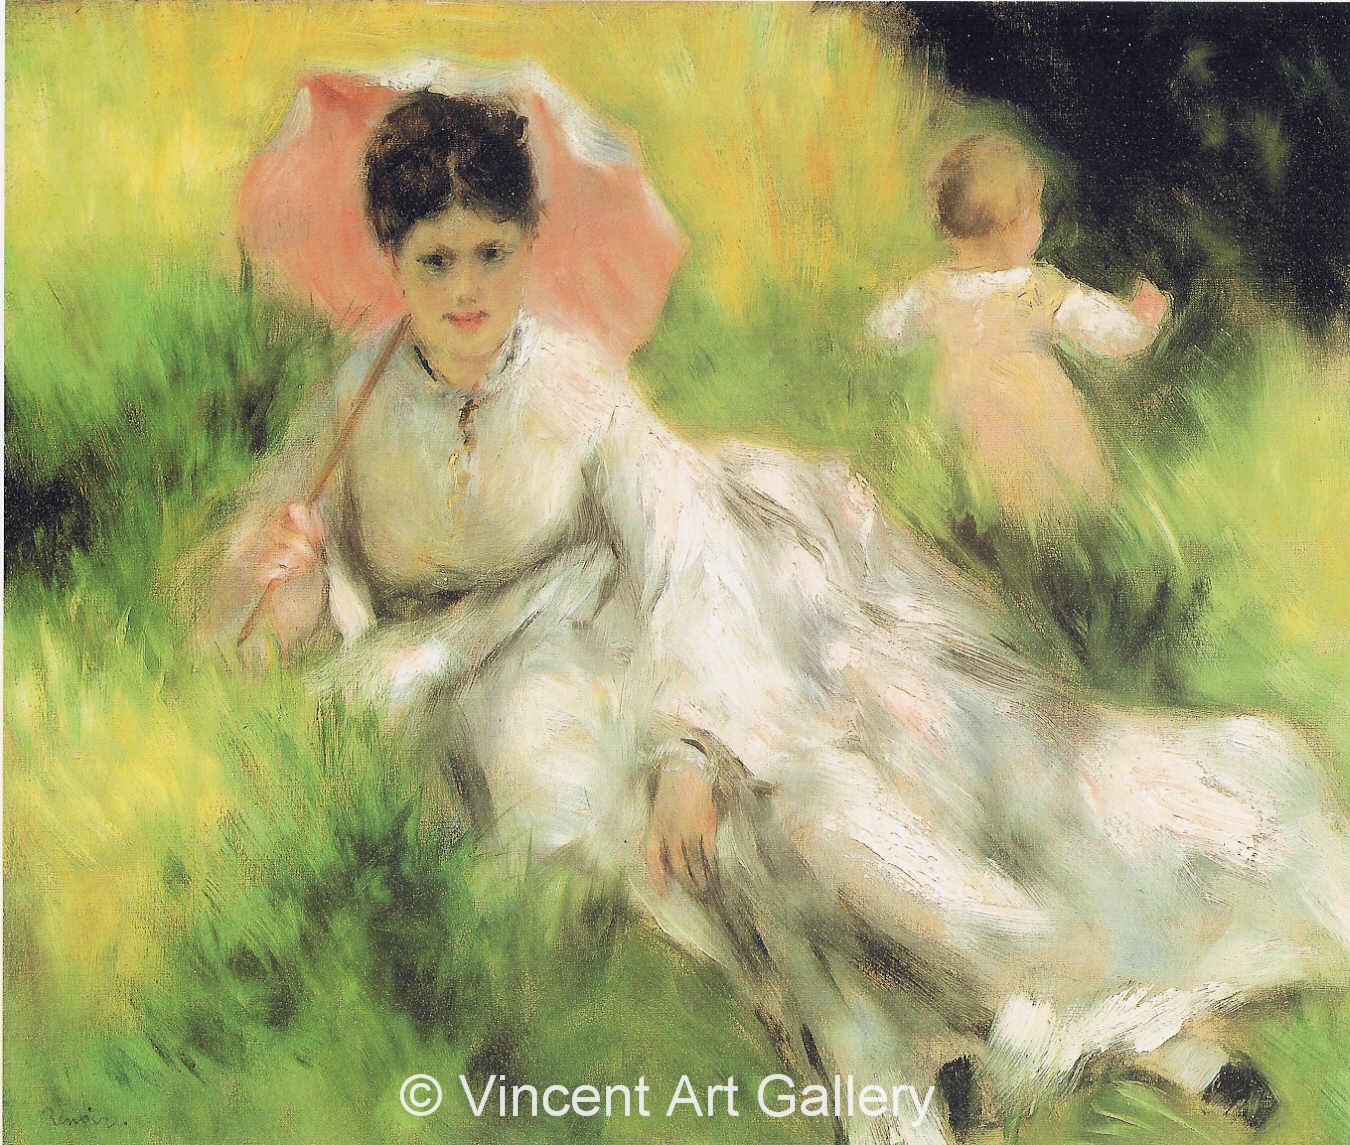 A3027, RENOIR, Woman with a Parasol and a Child in the Meadow, Camille Monet